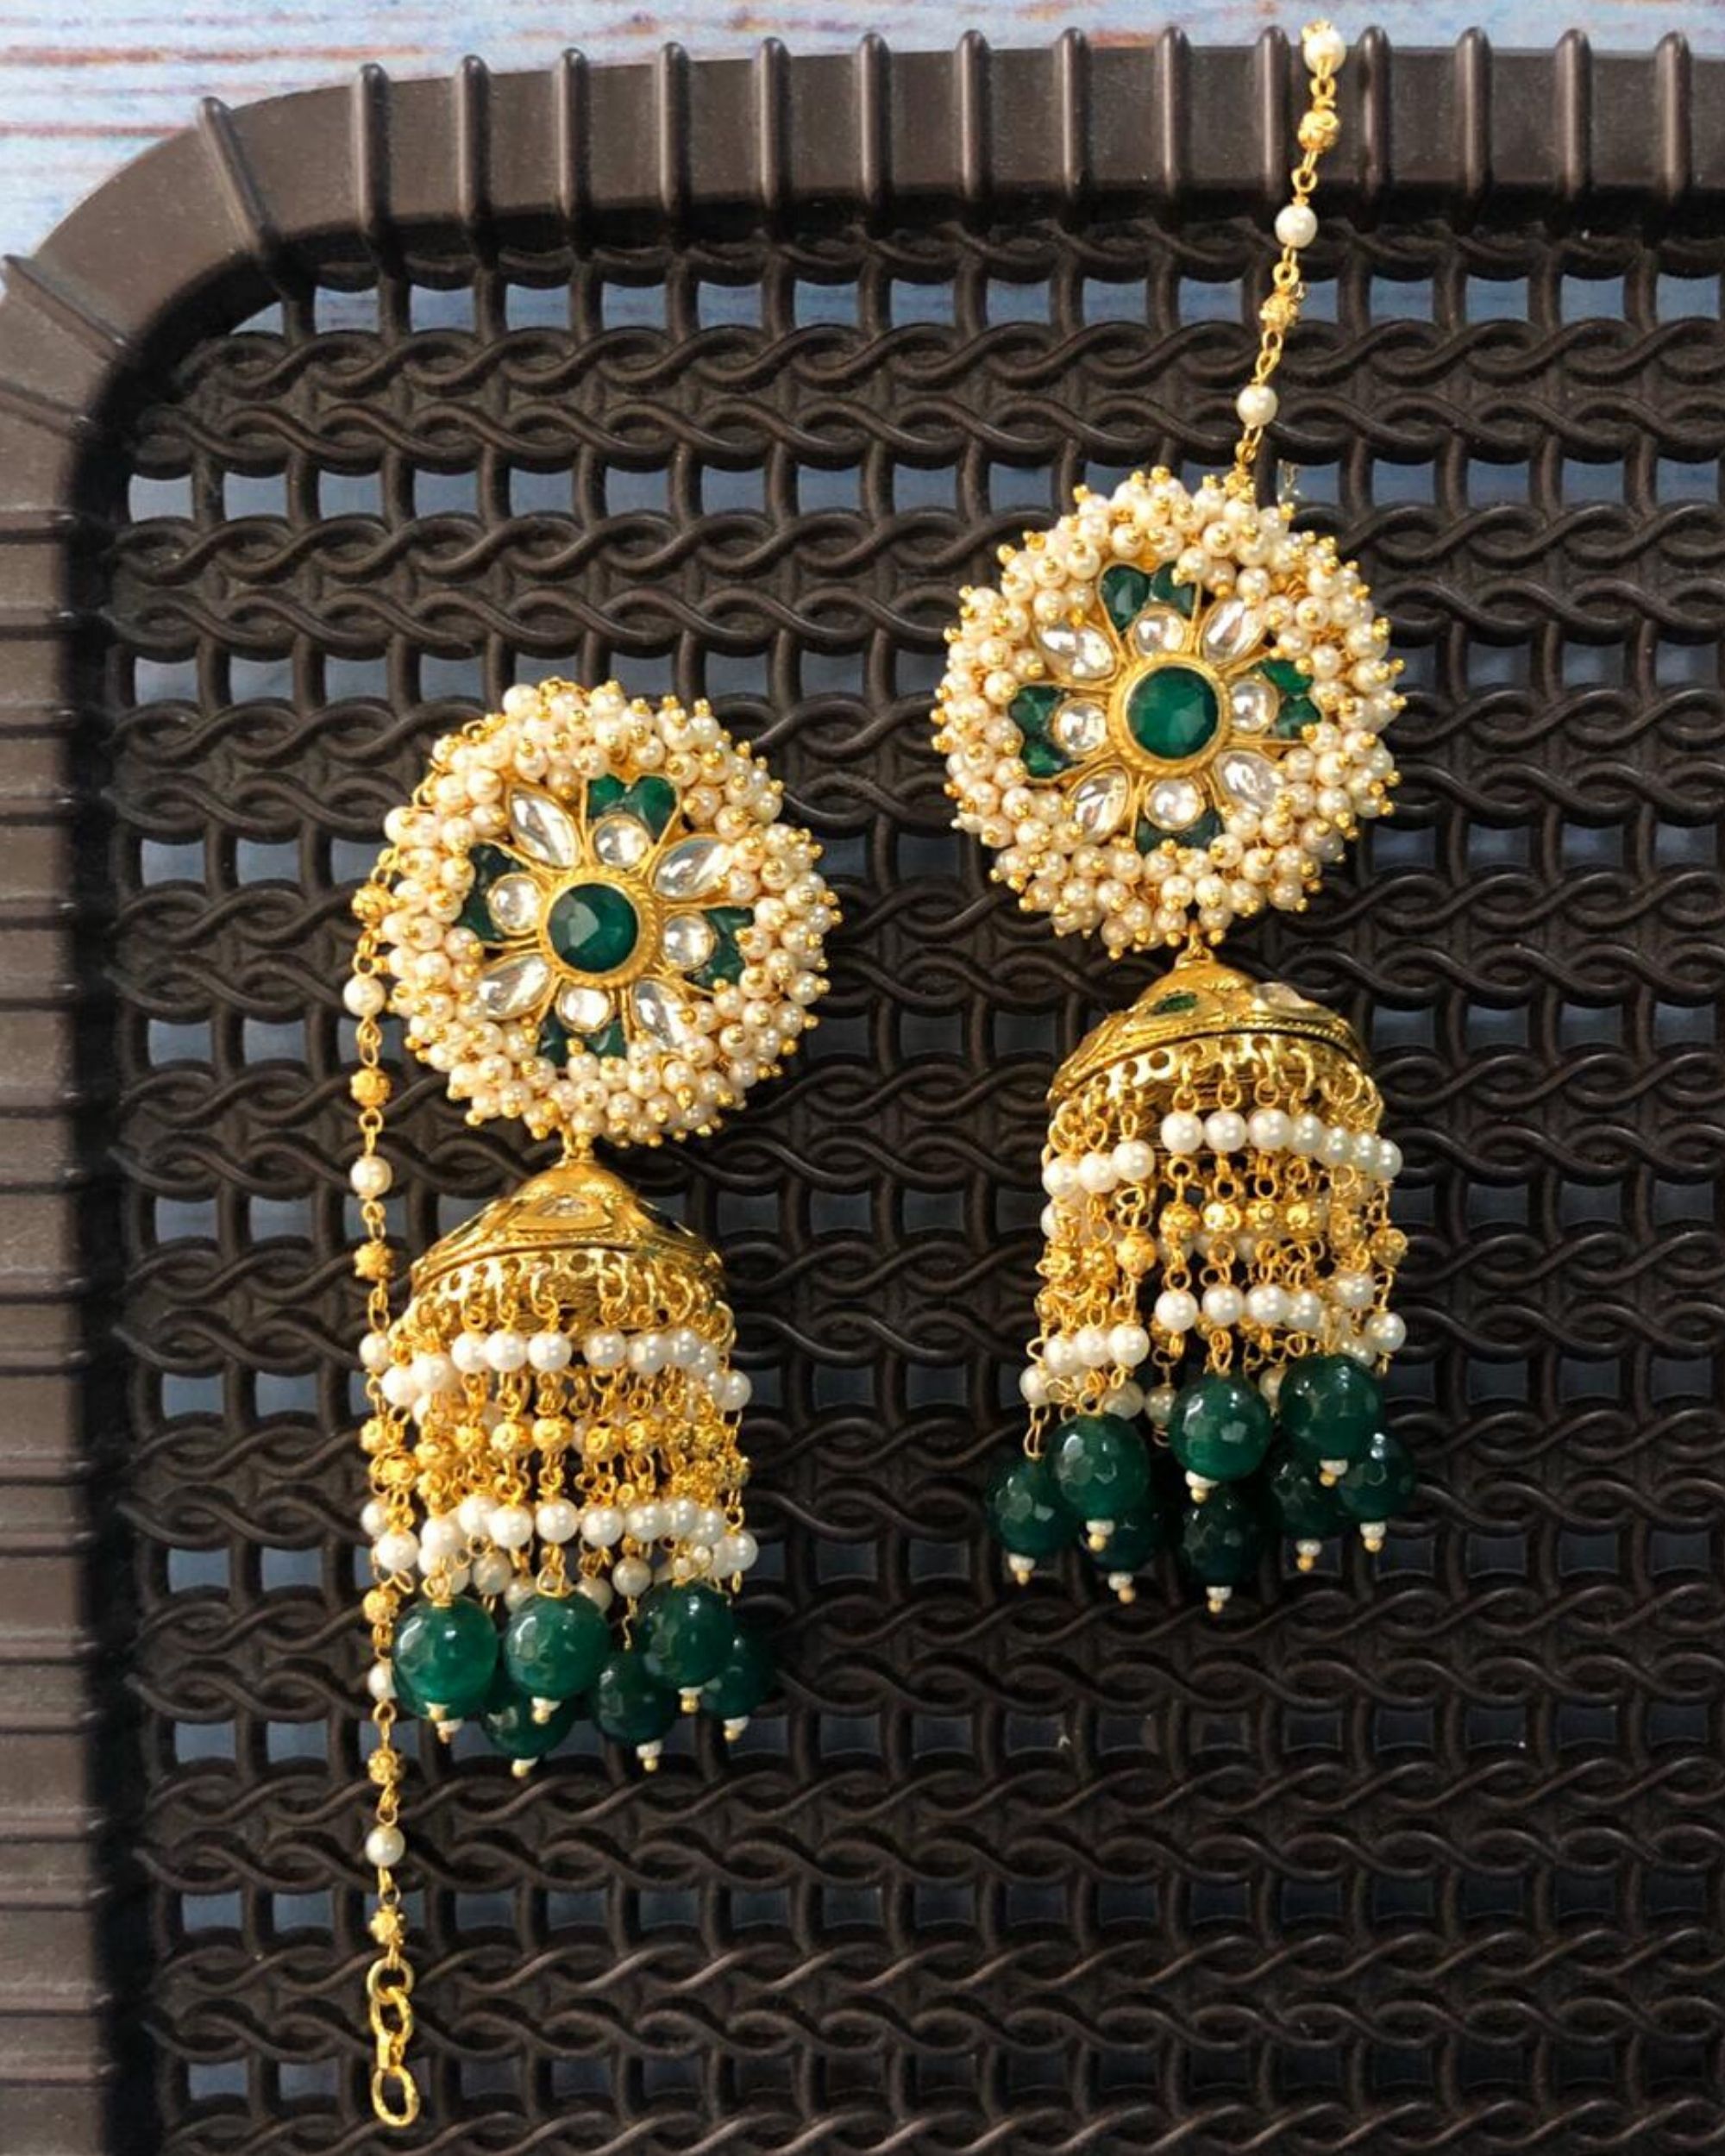 Estele Gold Plated Cz Designer Jaliwala Jhumka Earrings With Emerald  Crystals For Women Buy Estele Gold Plated Cz Designer Jaliwala Jhumka  Earrings With Emerald Crystals For Women Online at Best Price in